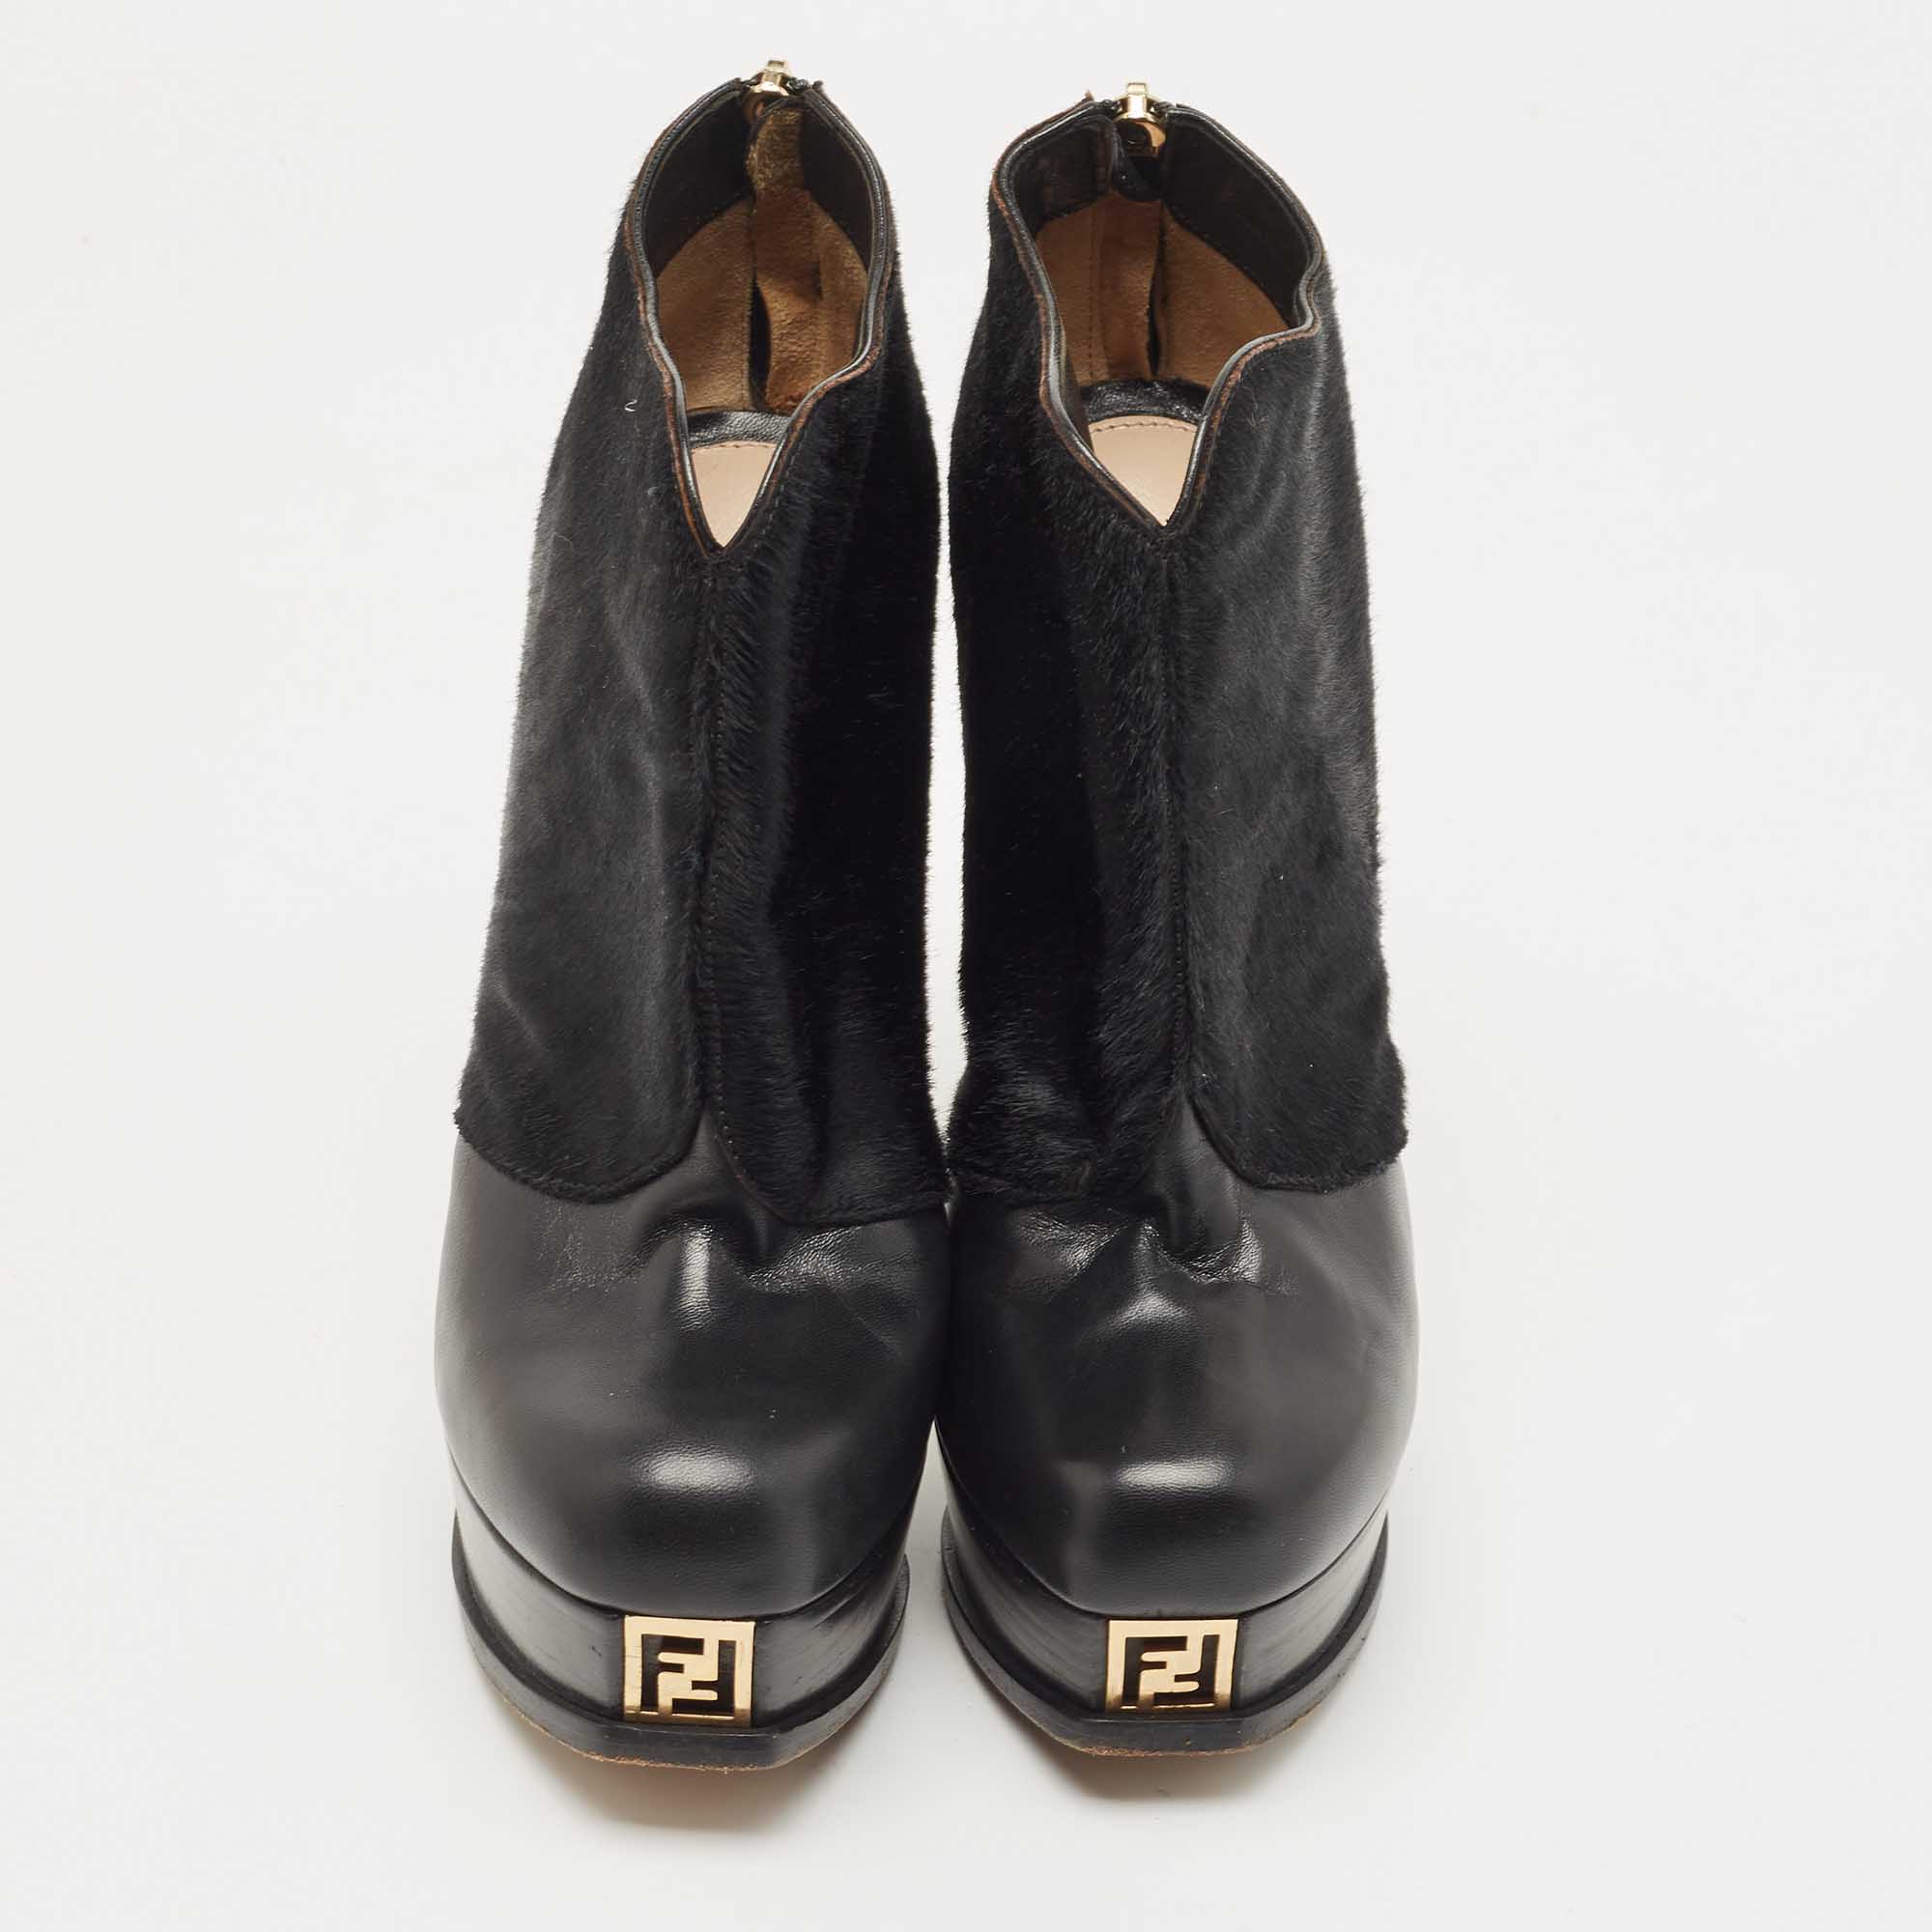 Fendi Black Leather And Suede Fendista Ankle Boots Size 36.5